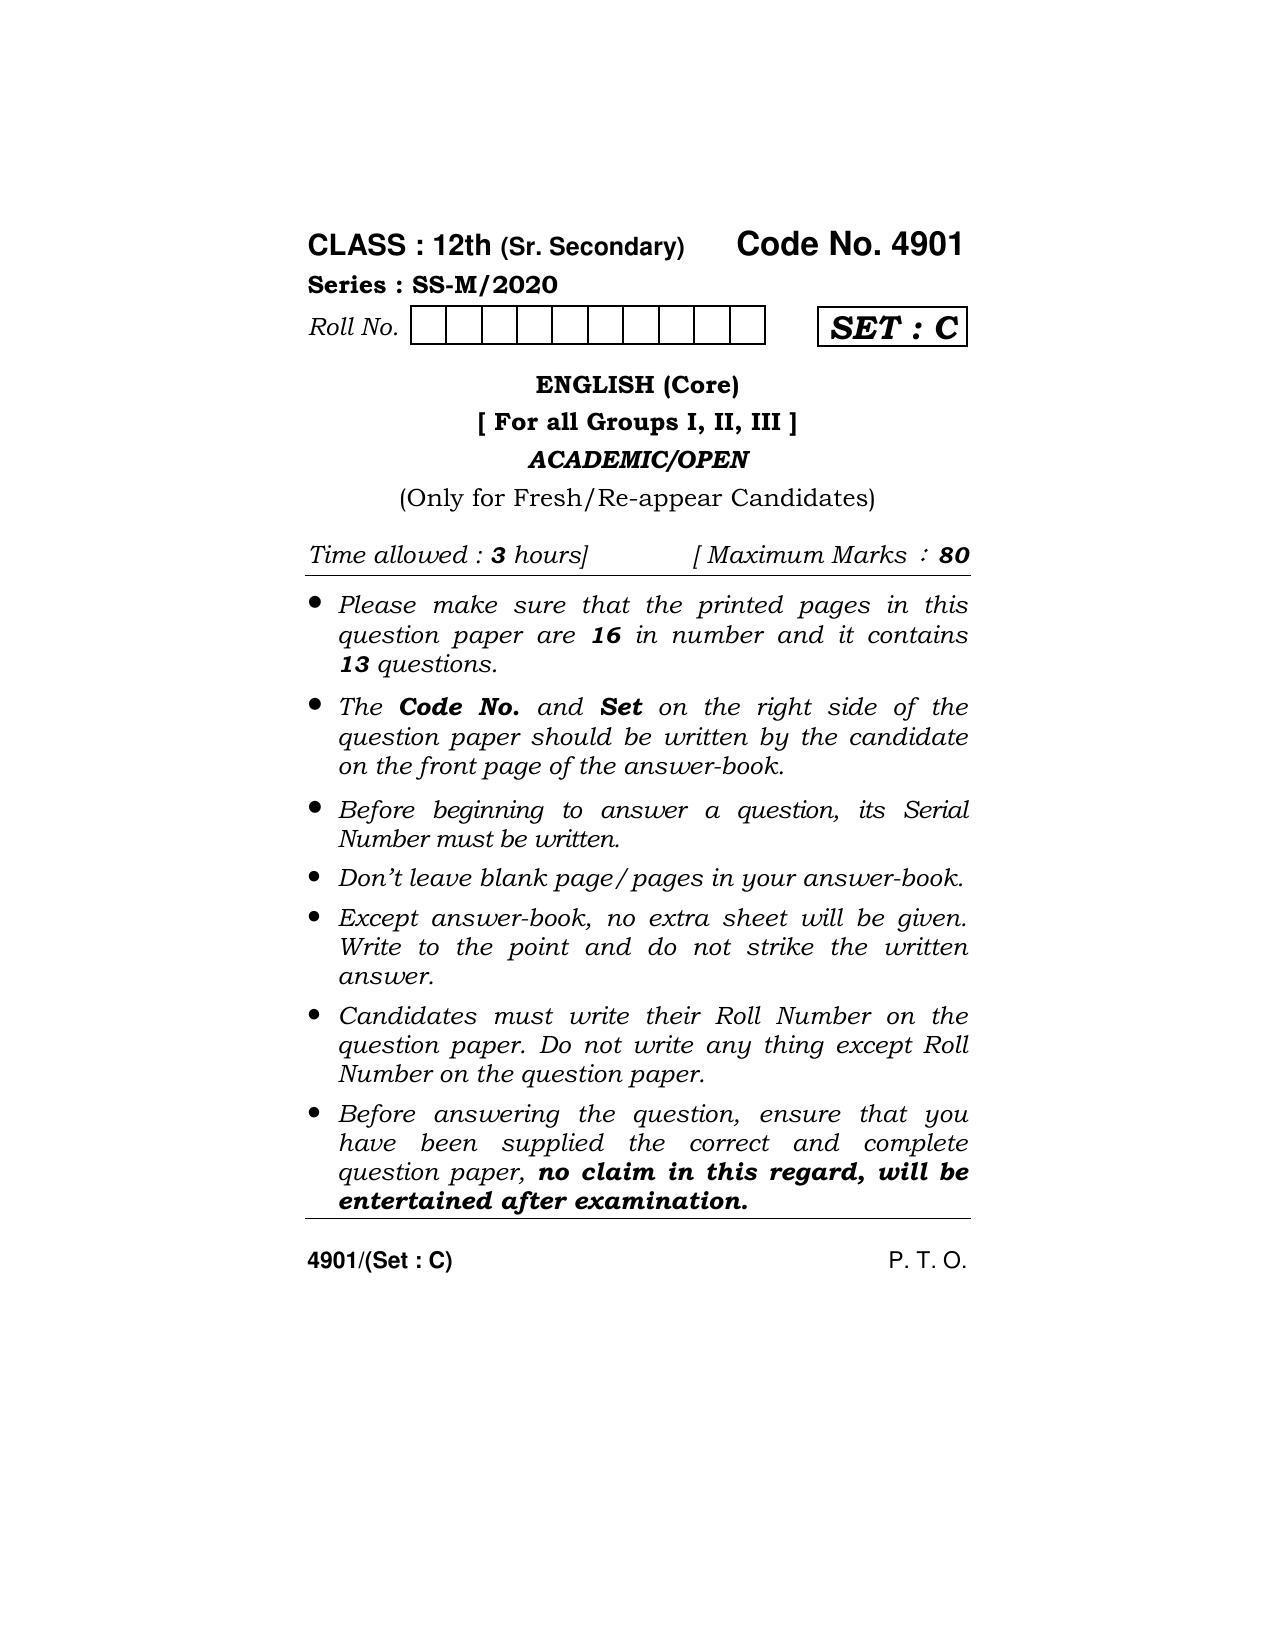 Haryana Board HBSE Class 12 English Core 2020 Question Paper - Page 33